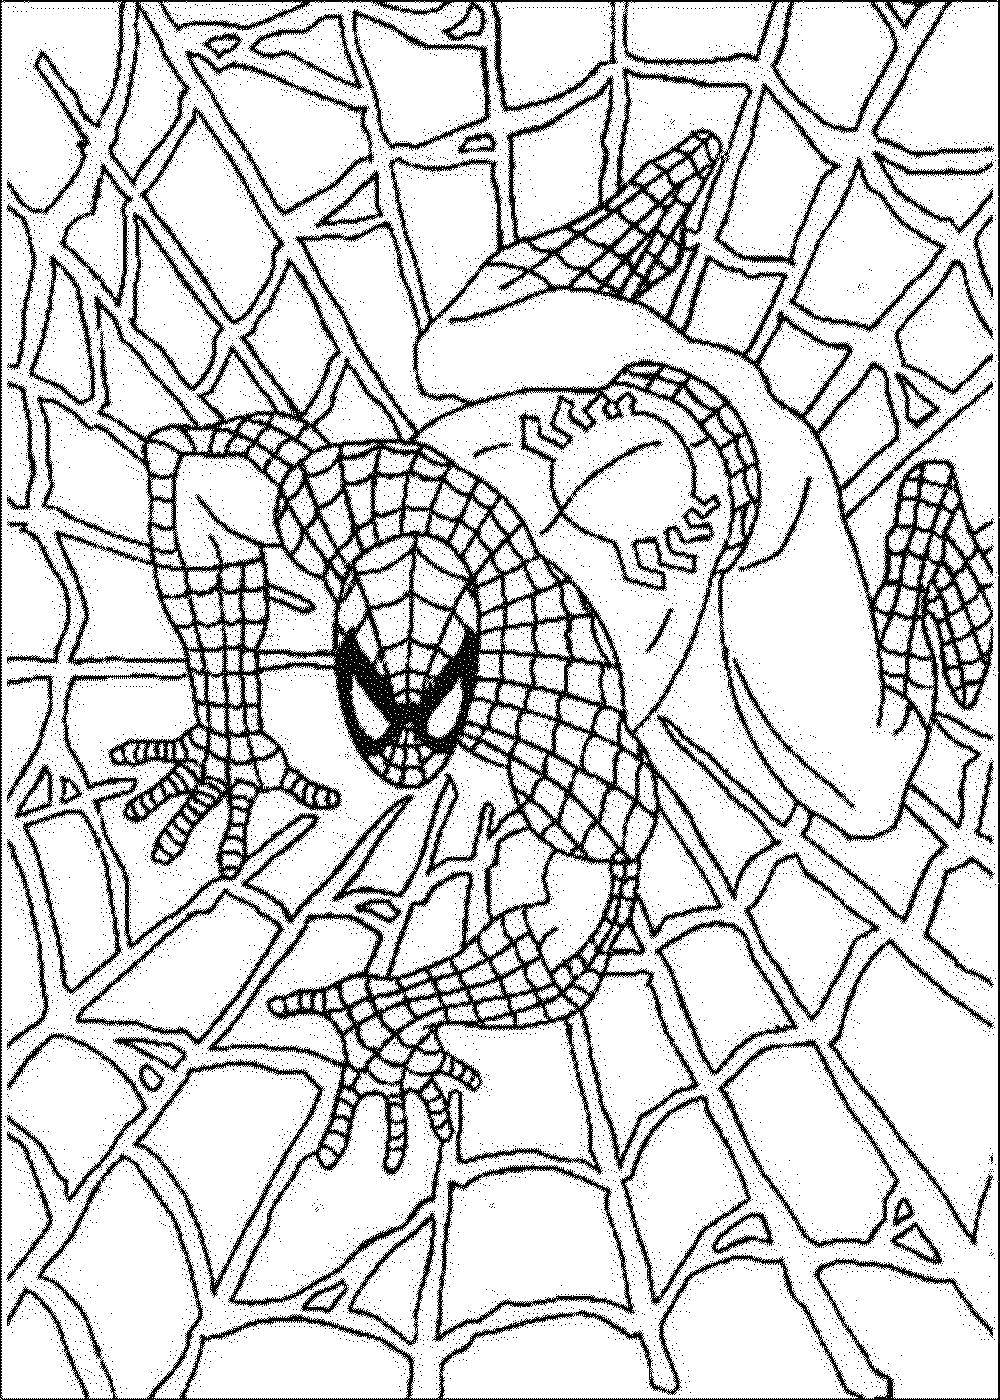 Coloring Spiderman on the web. Category Cartoon character. Tags:  Cartoon character, Spiderman, comics.